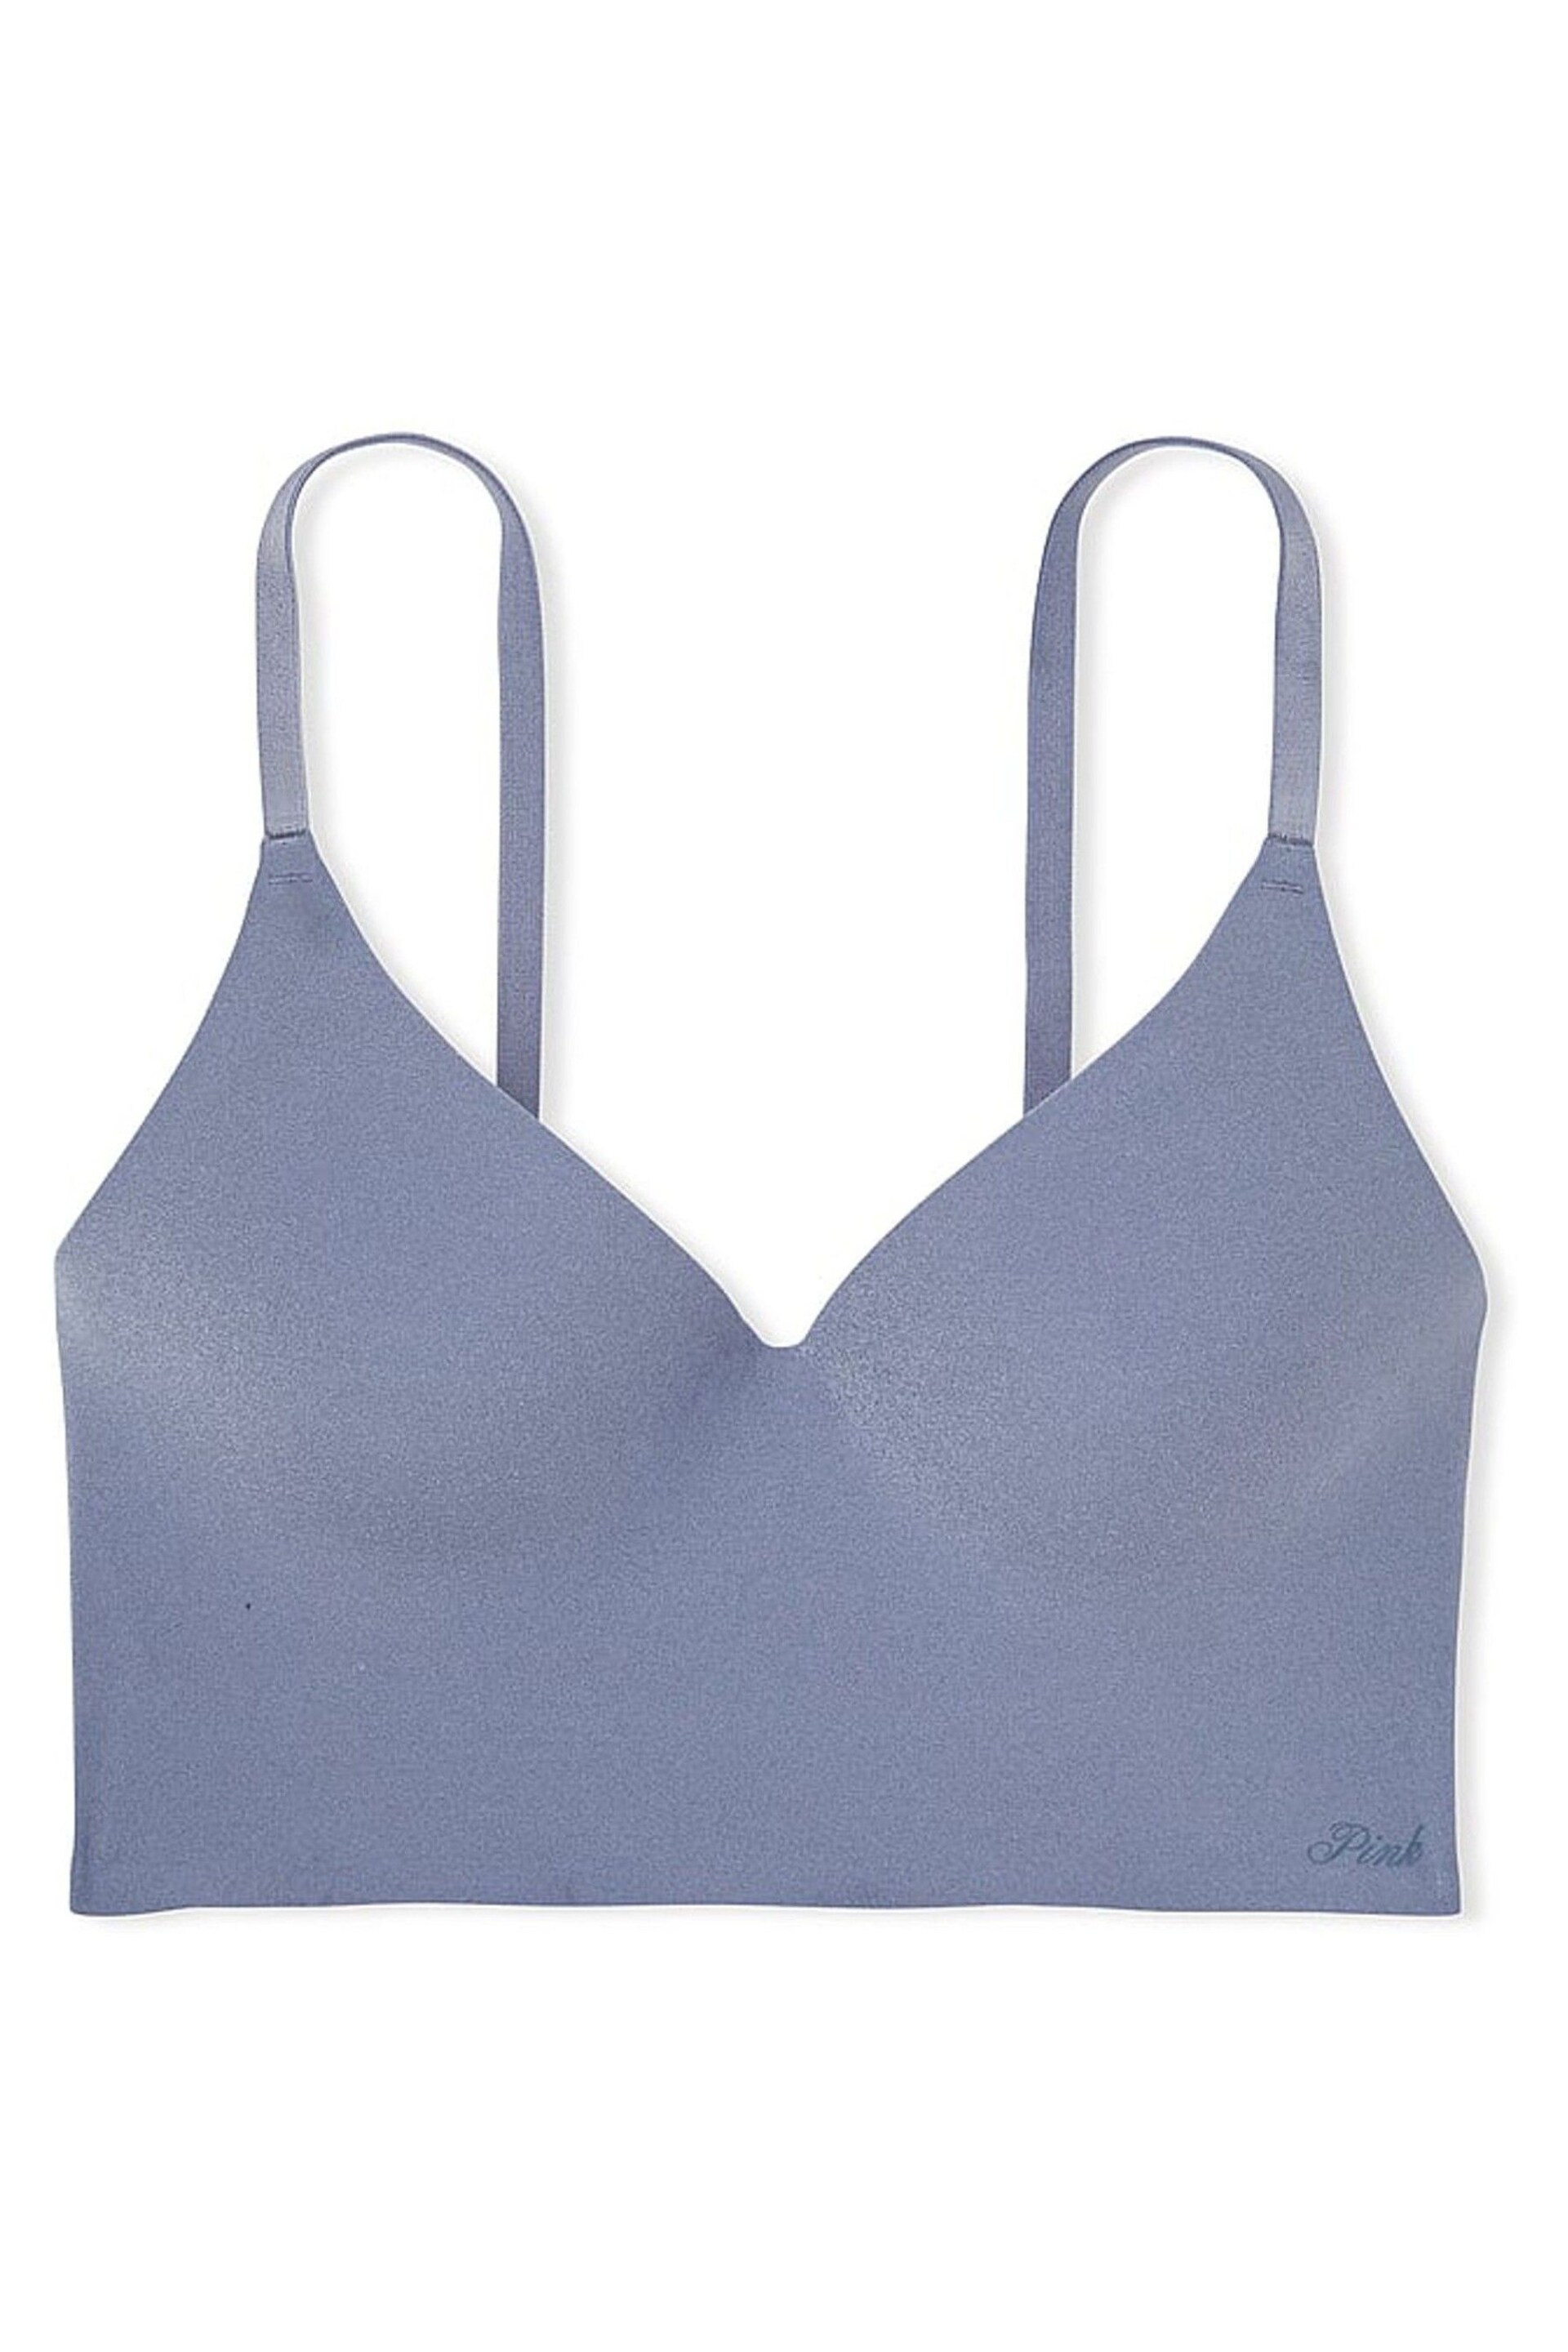 Victoria's Secret PINK Dusty Iris Blue Non Wired Push Up Lounge Bralette - Image 4 of 4